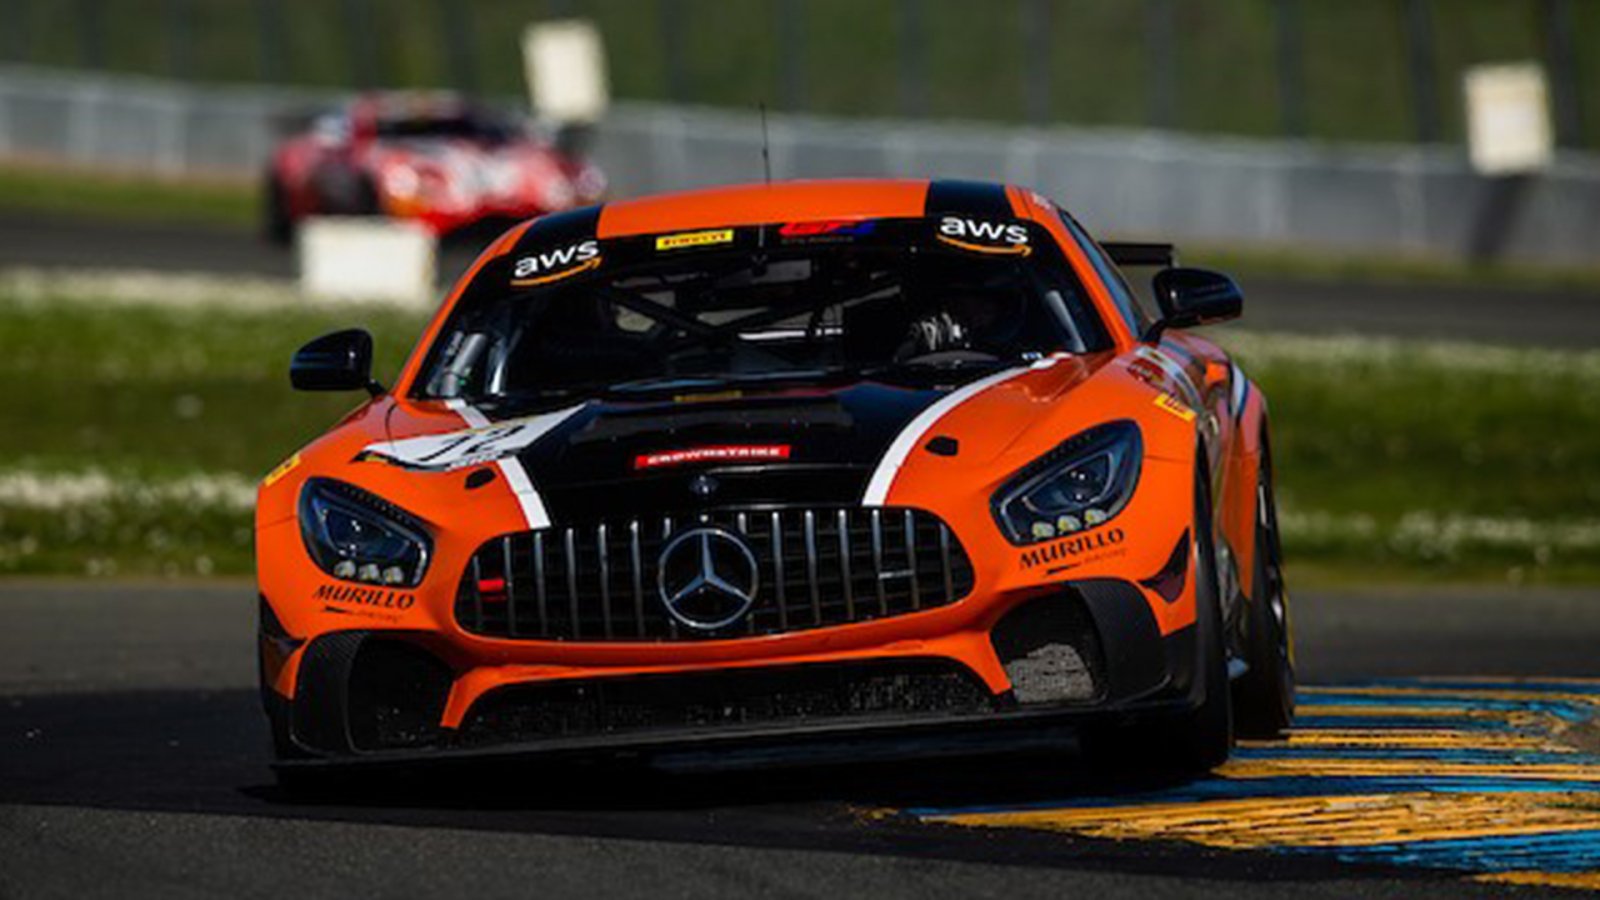 Record Eight Mercedes-AMG Motorsport Customer Racing Entries across Three SRO America Championships Compete This Weekend at Sonoma Raceway